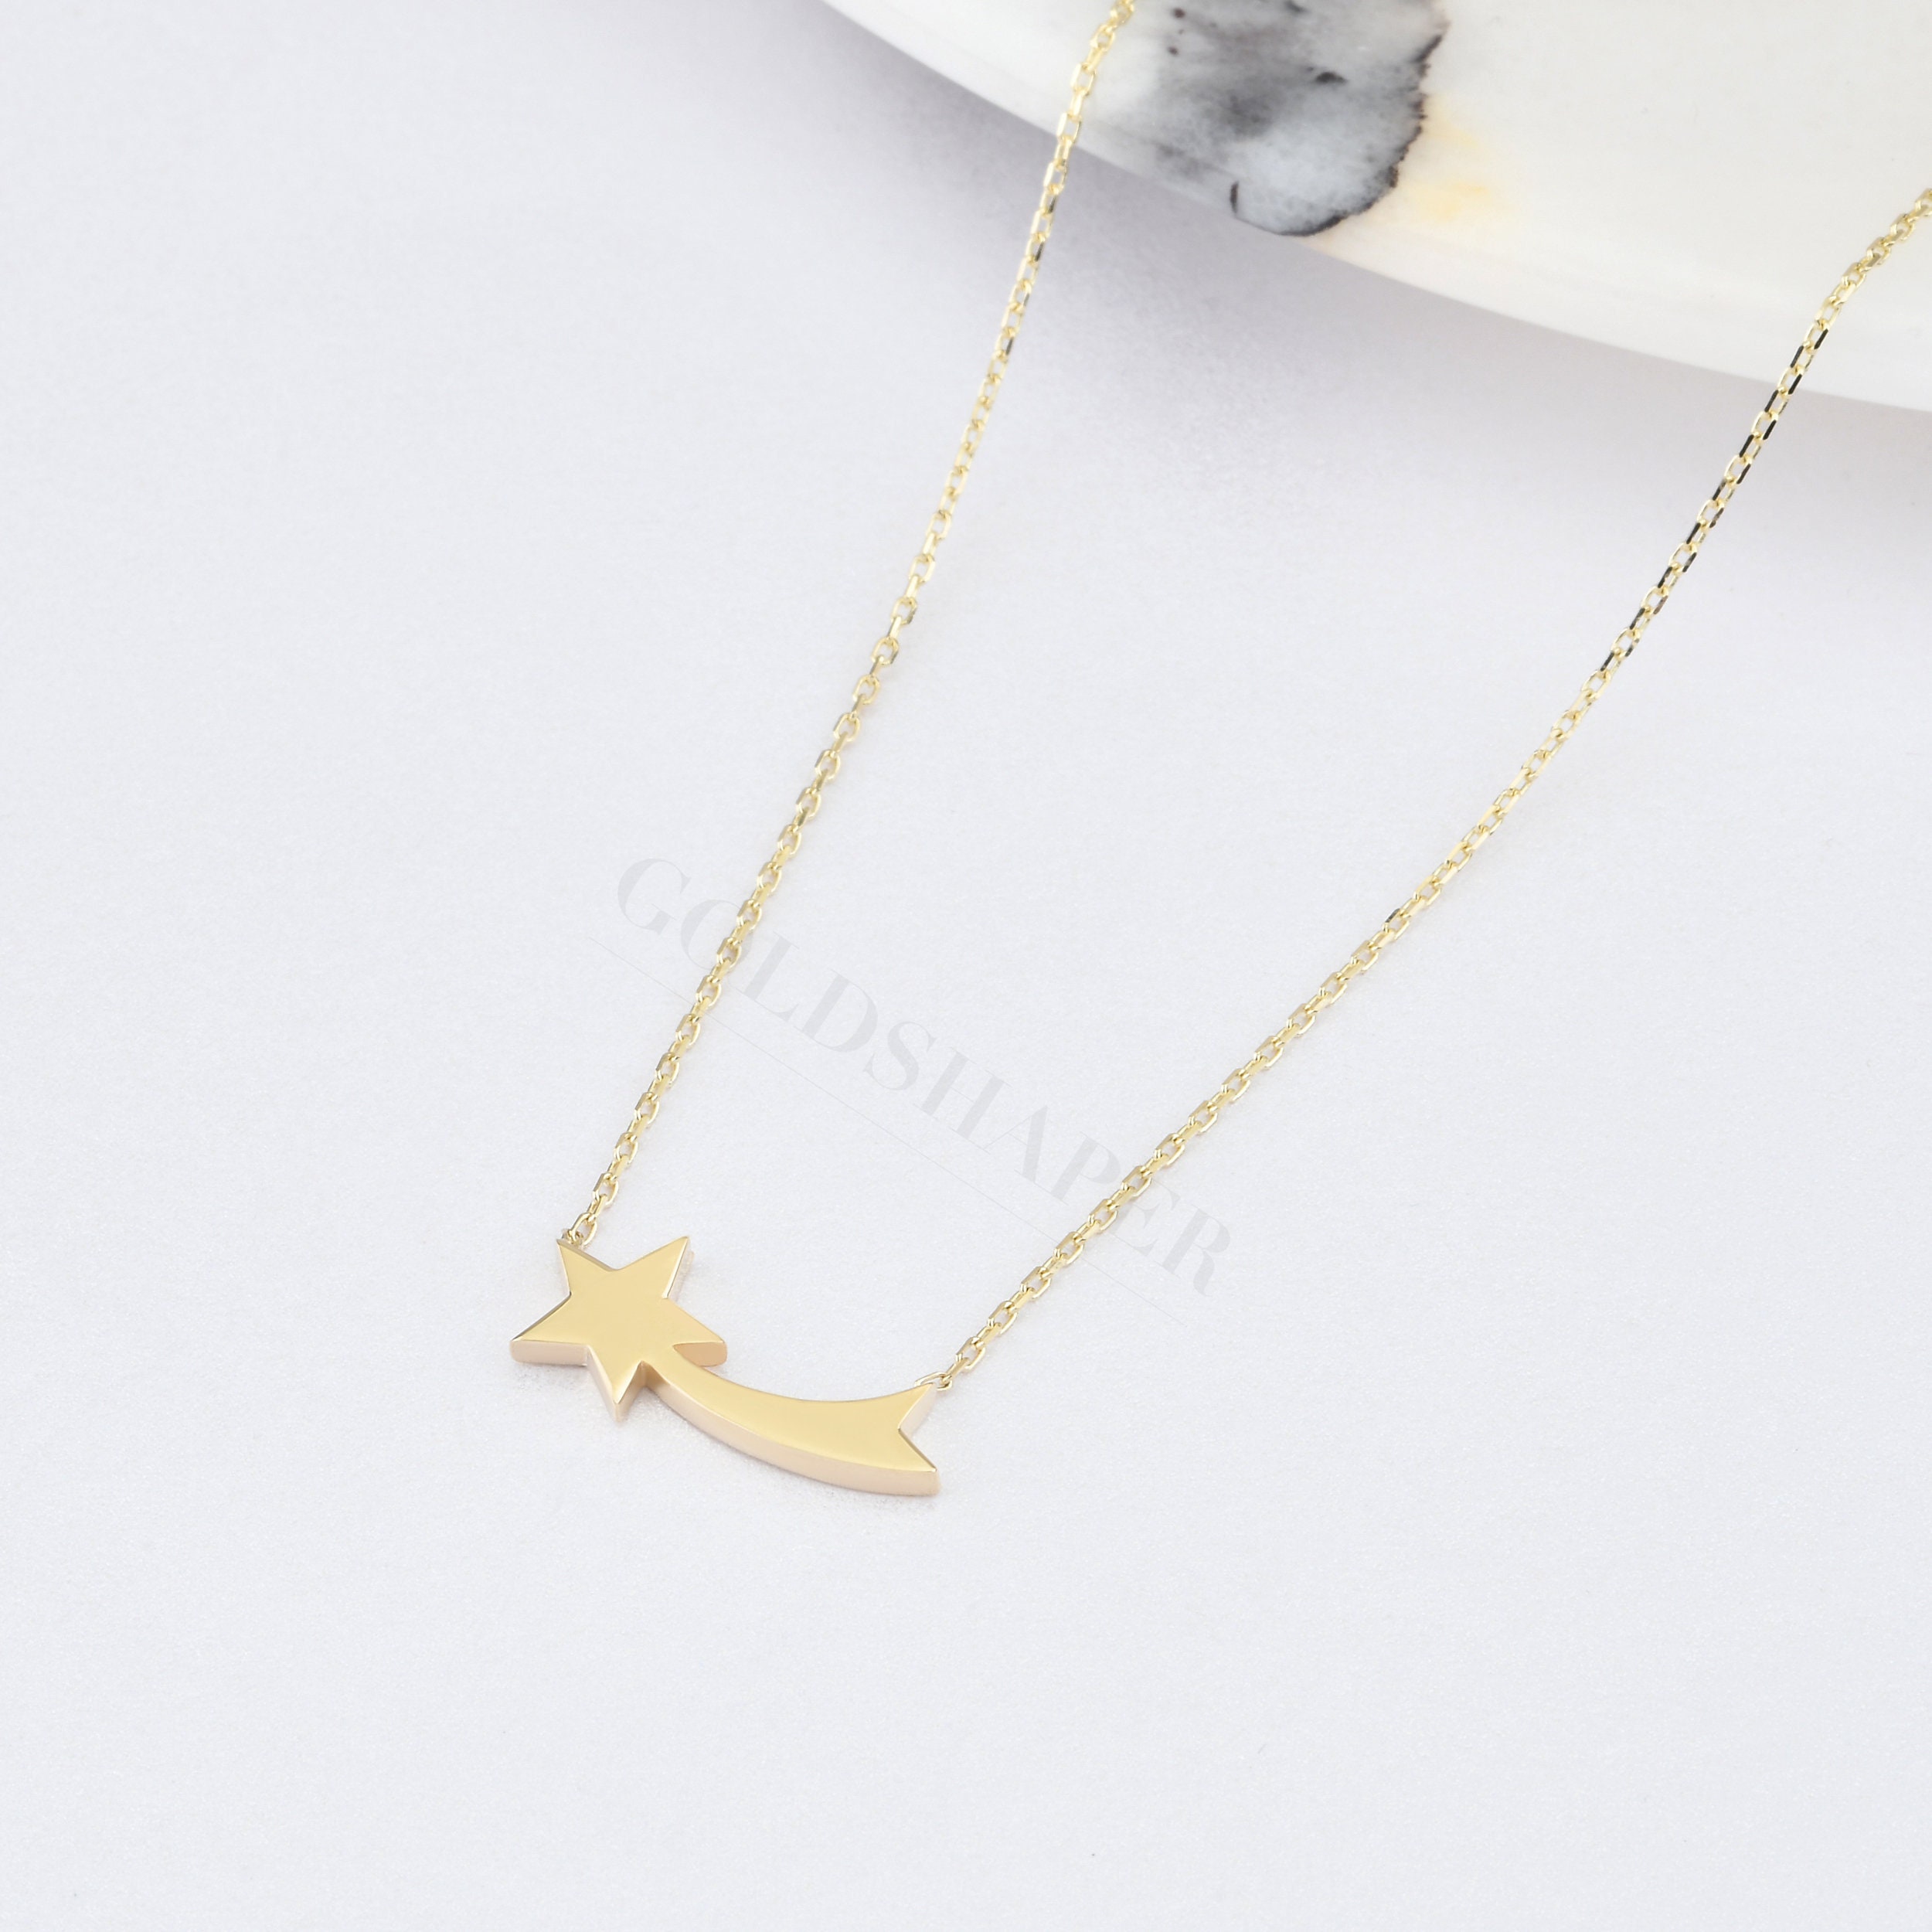 Falling Star Necklace, 14K Gold Comet Gift For Her, Valentine's Days Gift, Christmas Gift